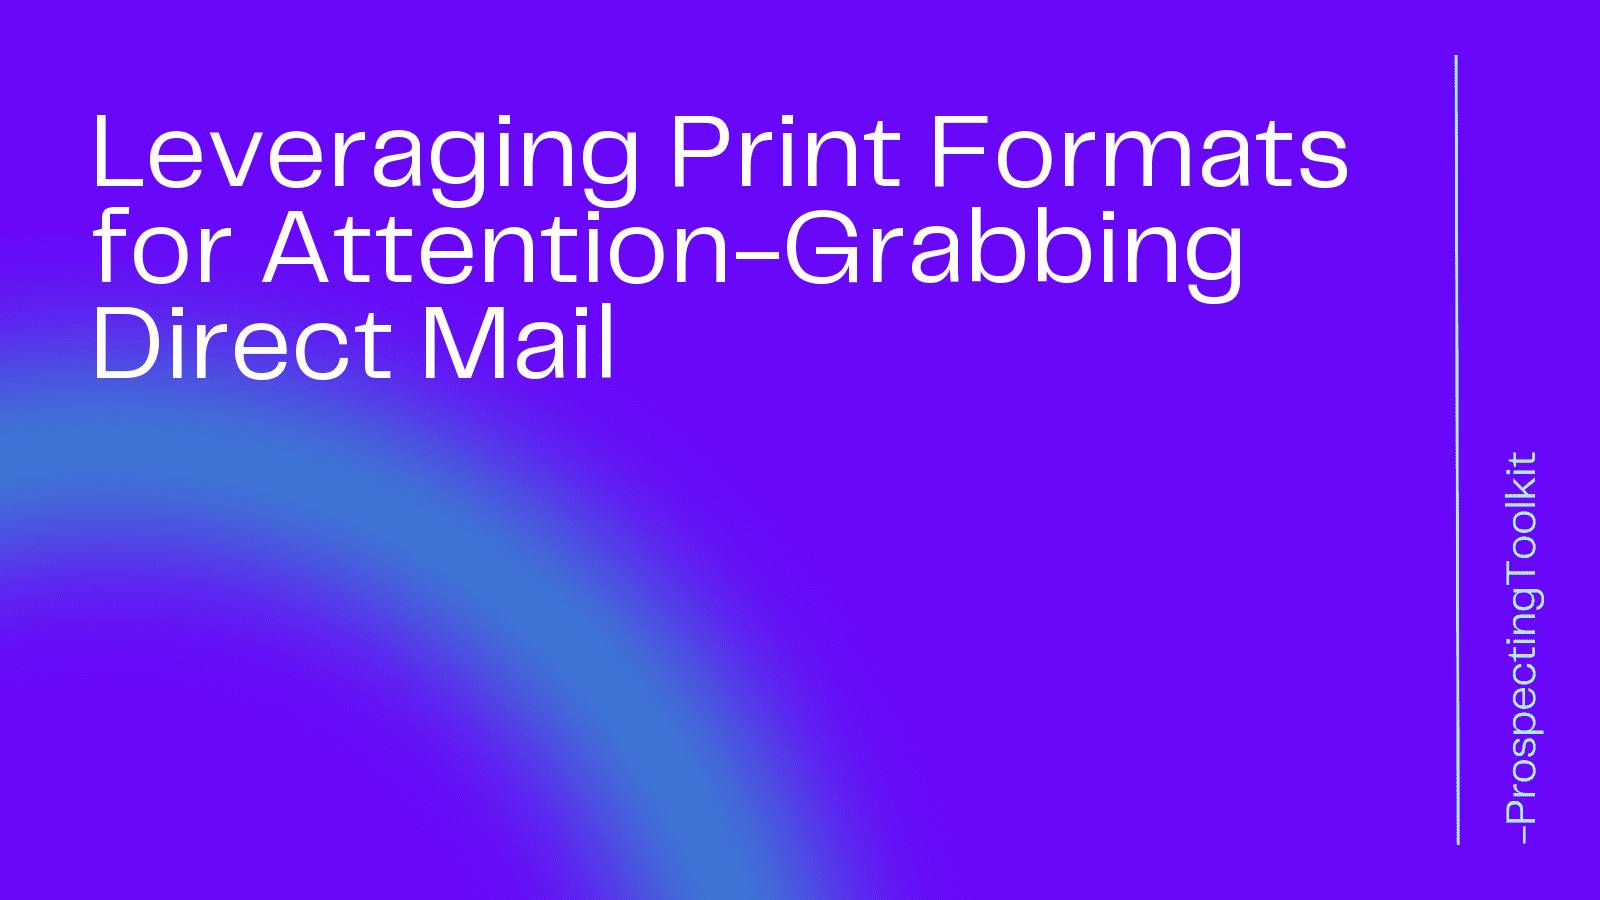 Leveraging Print Formats for Attention-Grabbing Direct Mail